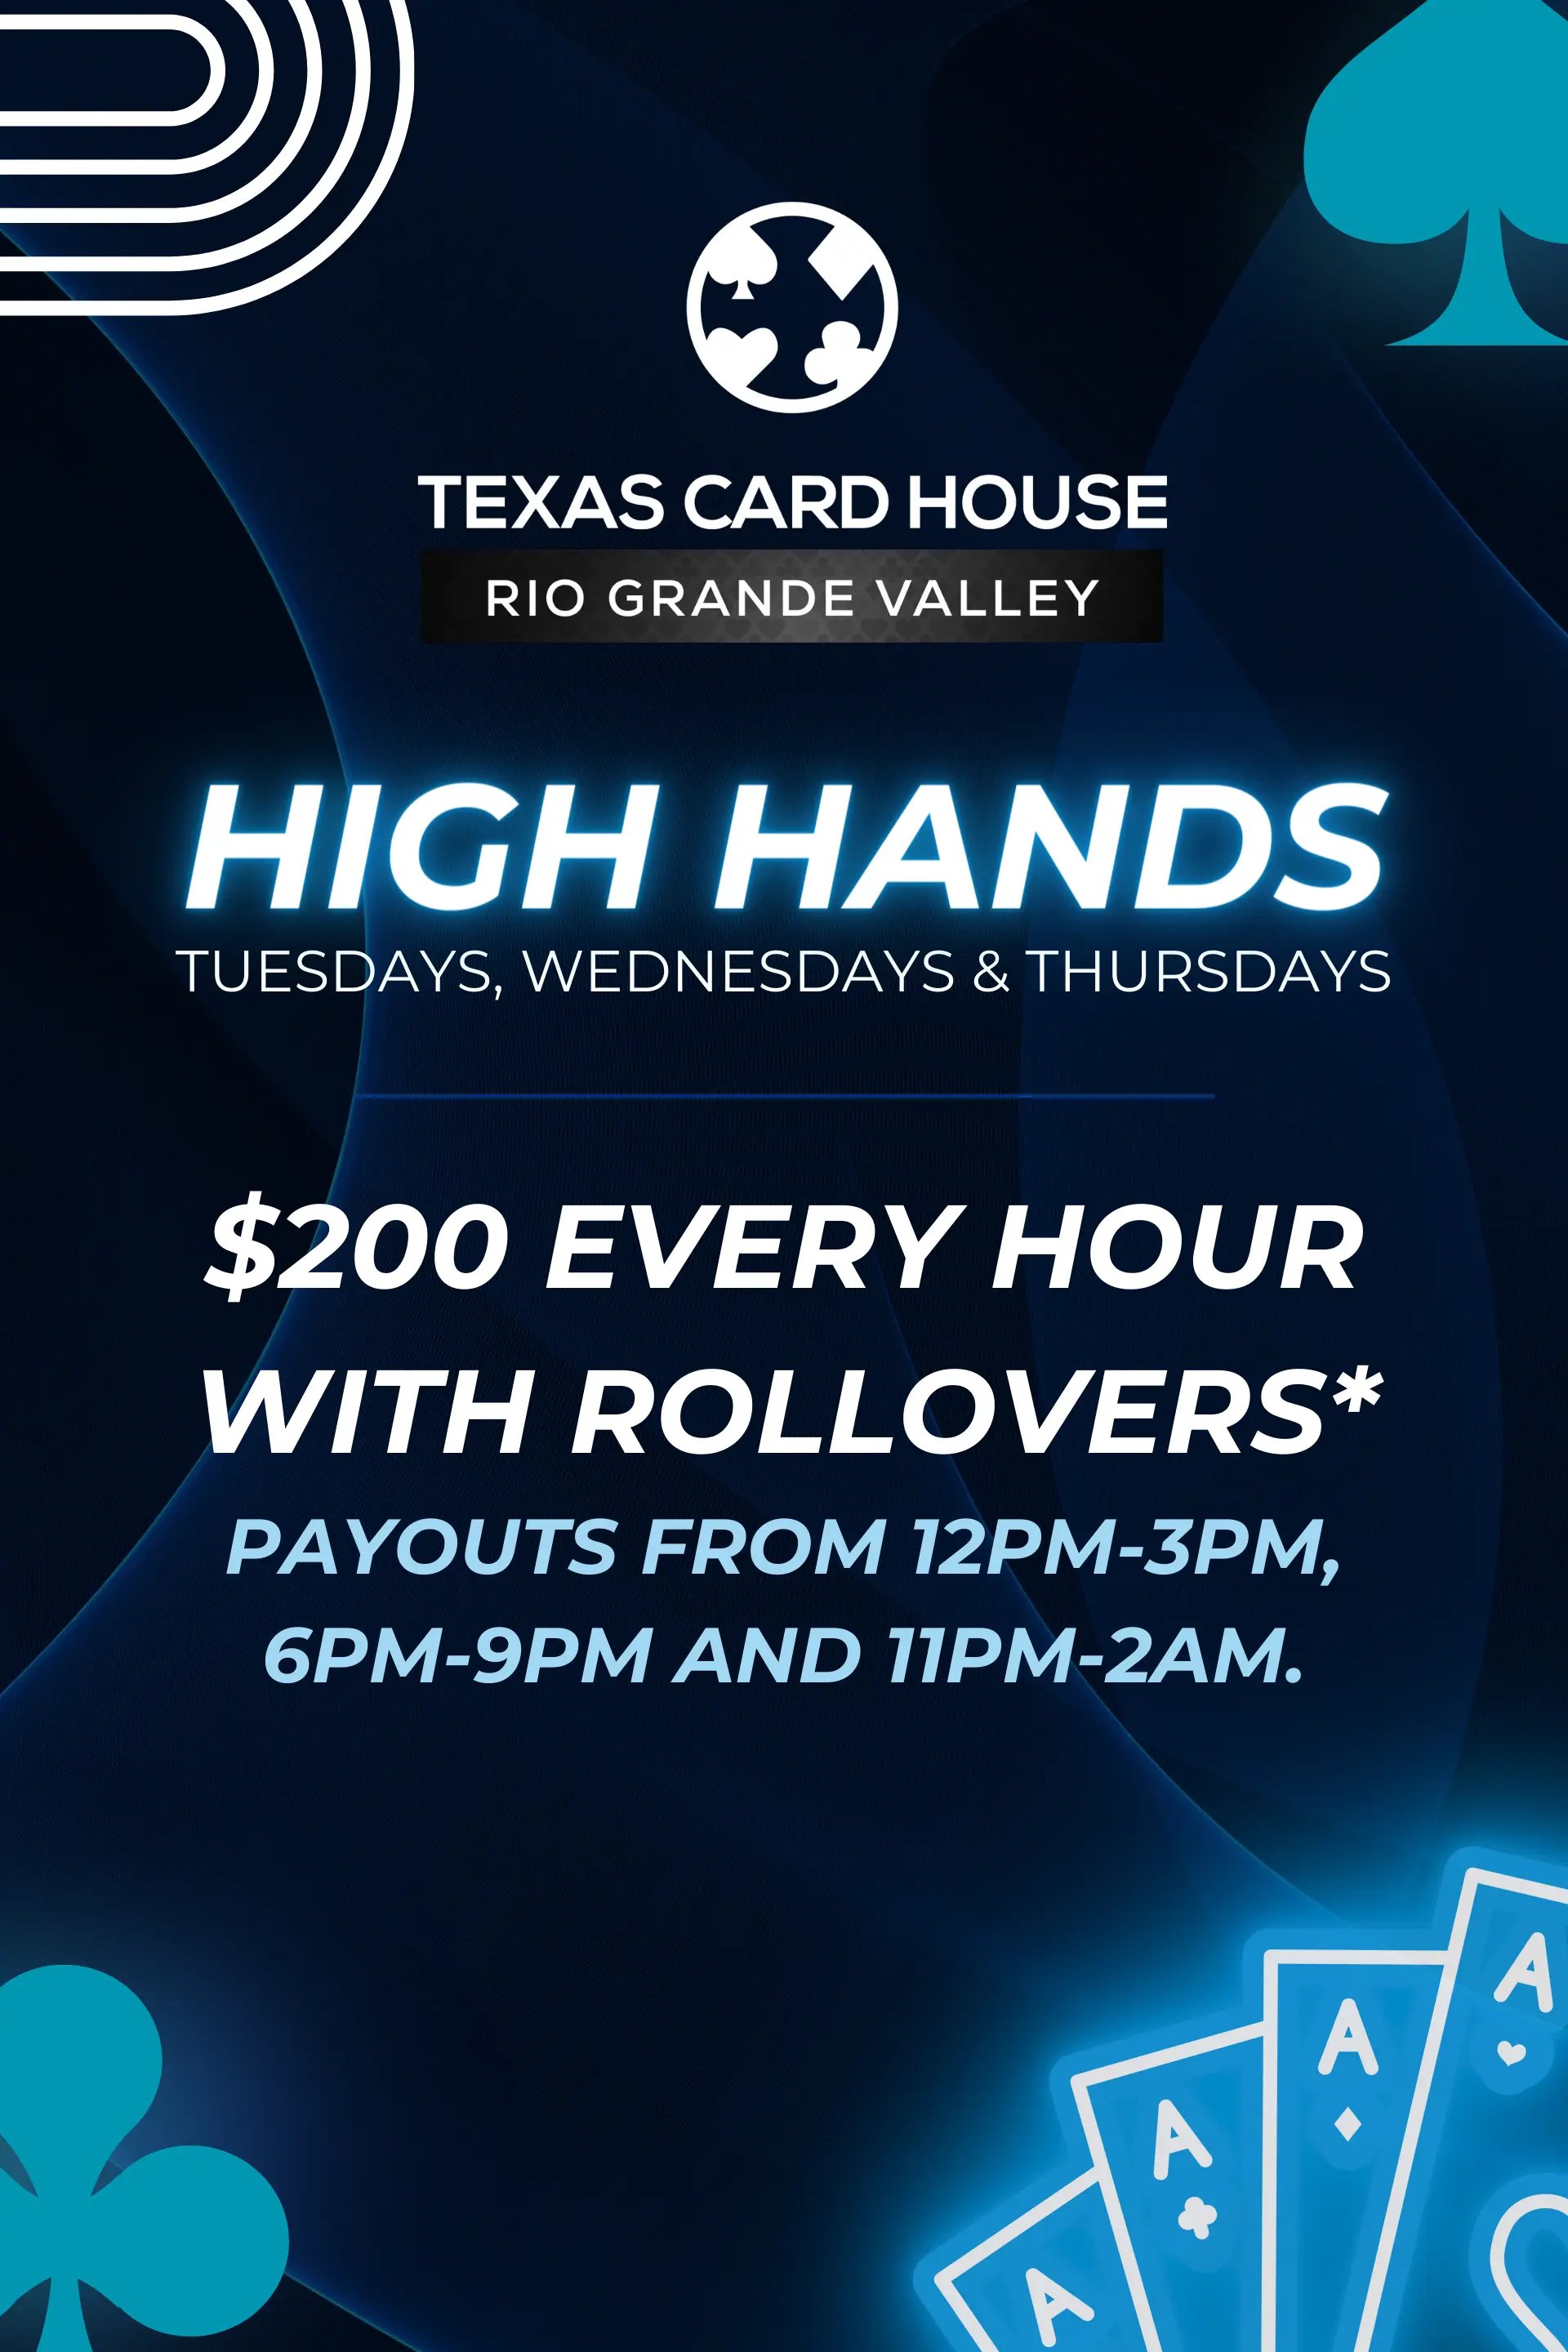 HighHands Promo at TCH RGV